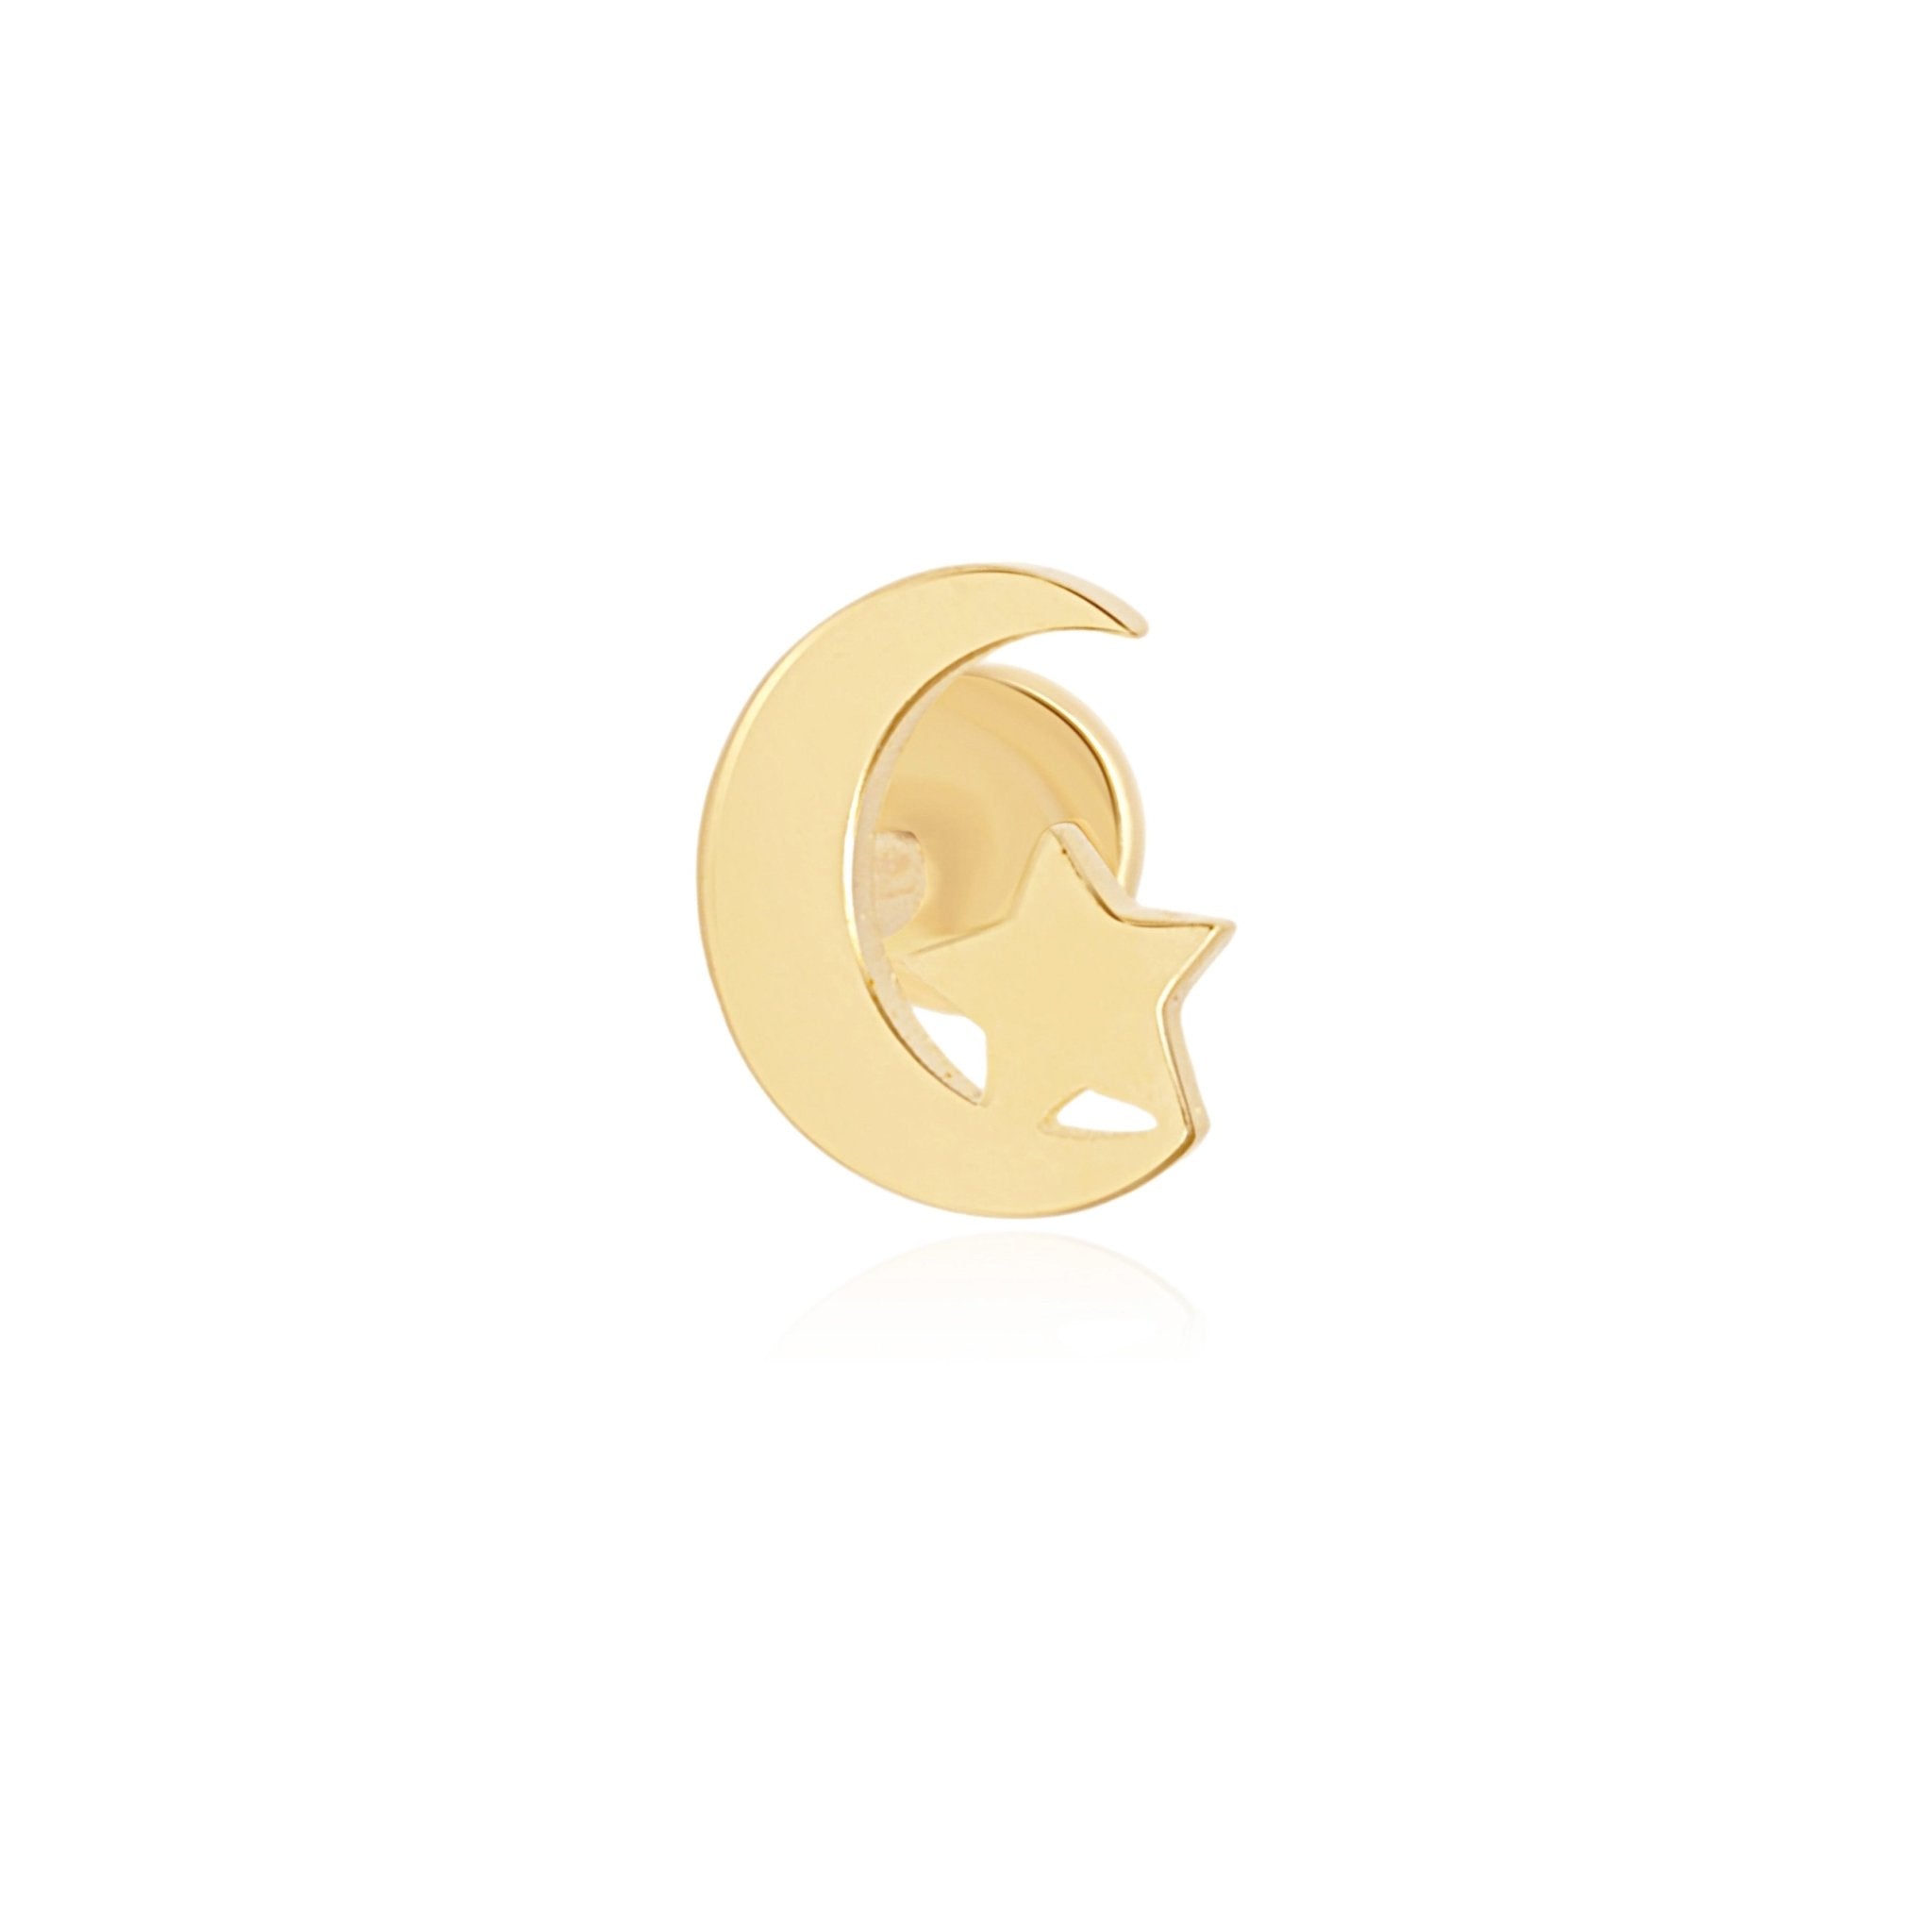 Crescent Moon and Star Flat Back Earring Earrings Estella Collection #product_description# 17924 14k Cartilage Earring Cartilage Earrings #tag4# #tag5# #tag6# #tag7# #tag8# #tag9# #tag10# 14K Yellow Gold 5MM